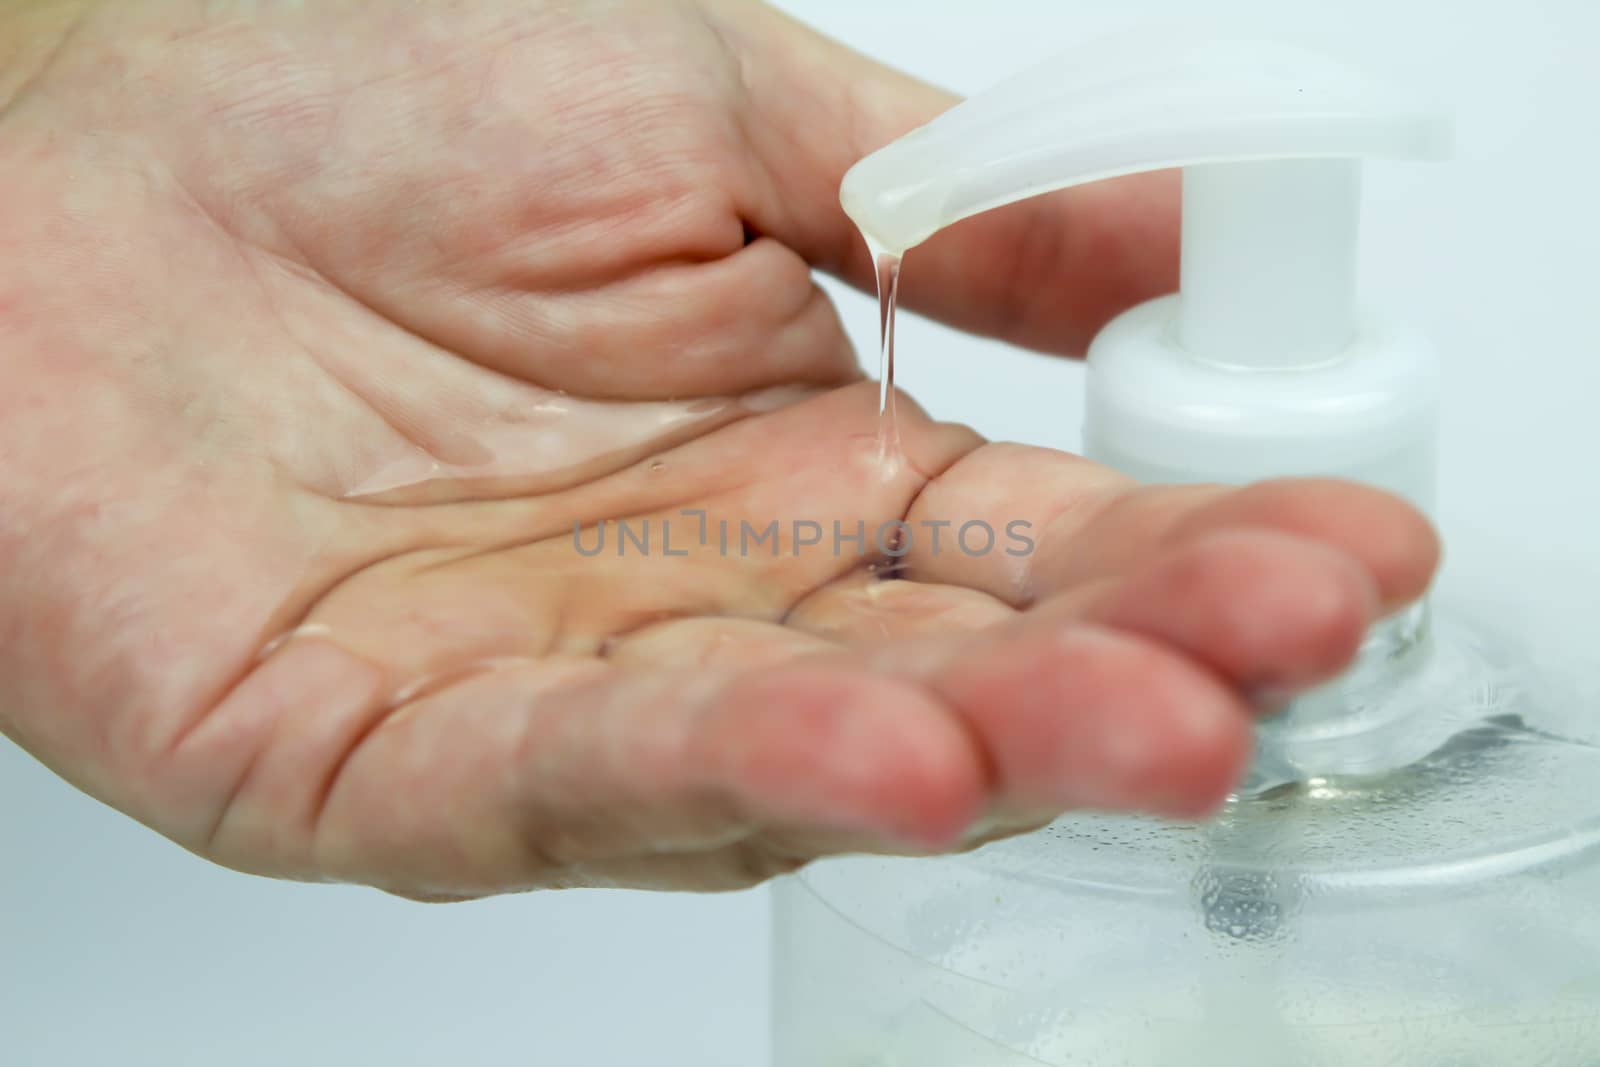 Hydroalcoholic gel bottle pouring gel into a hand by soniabonet